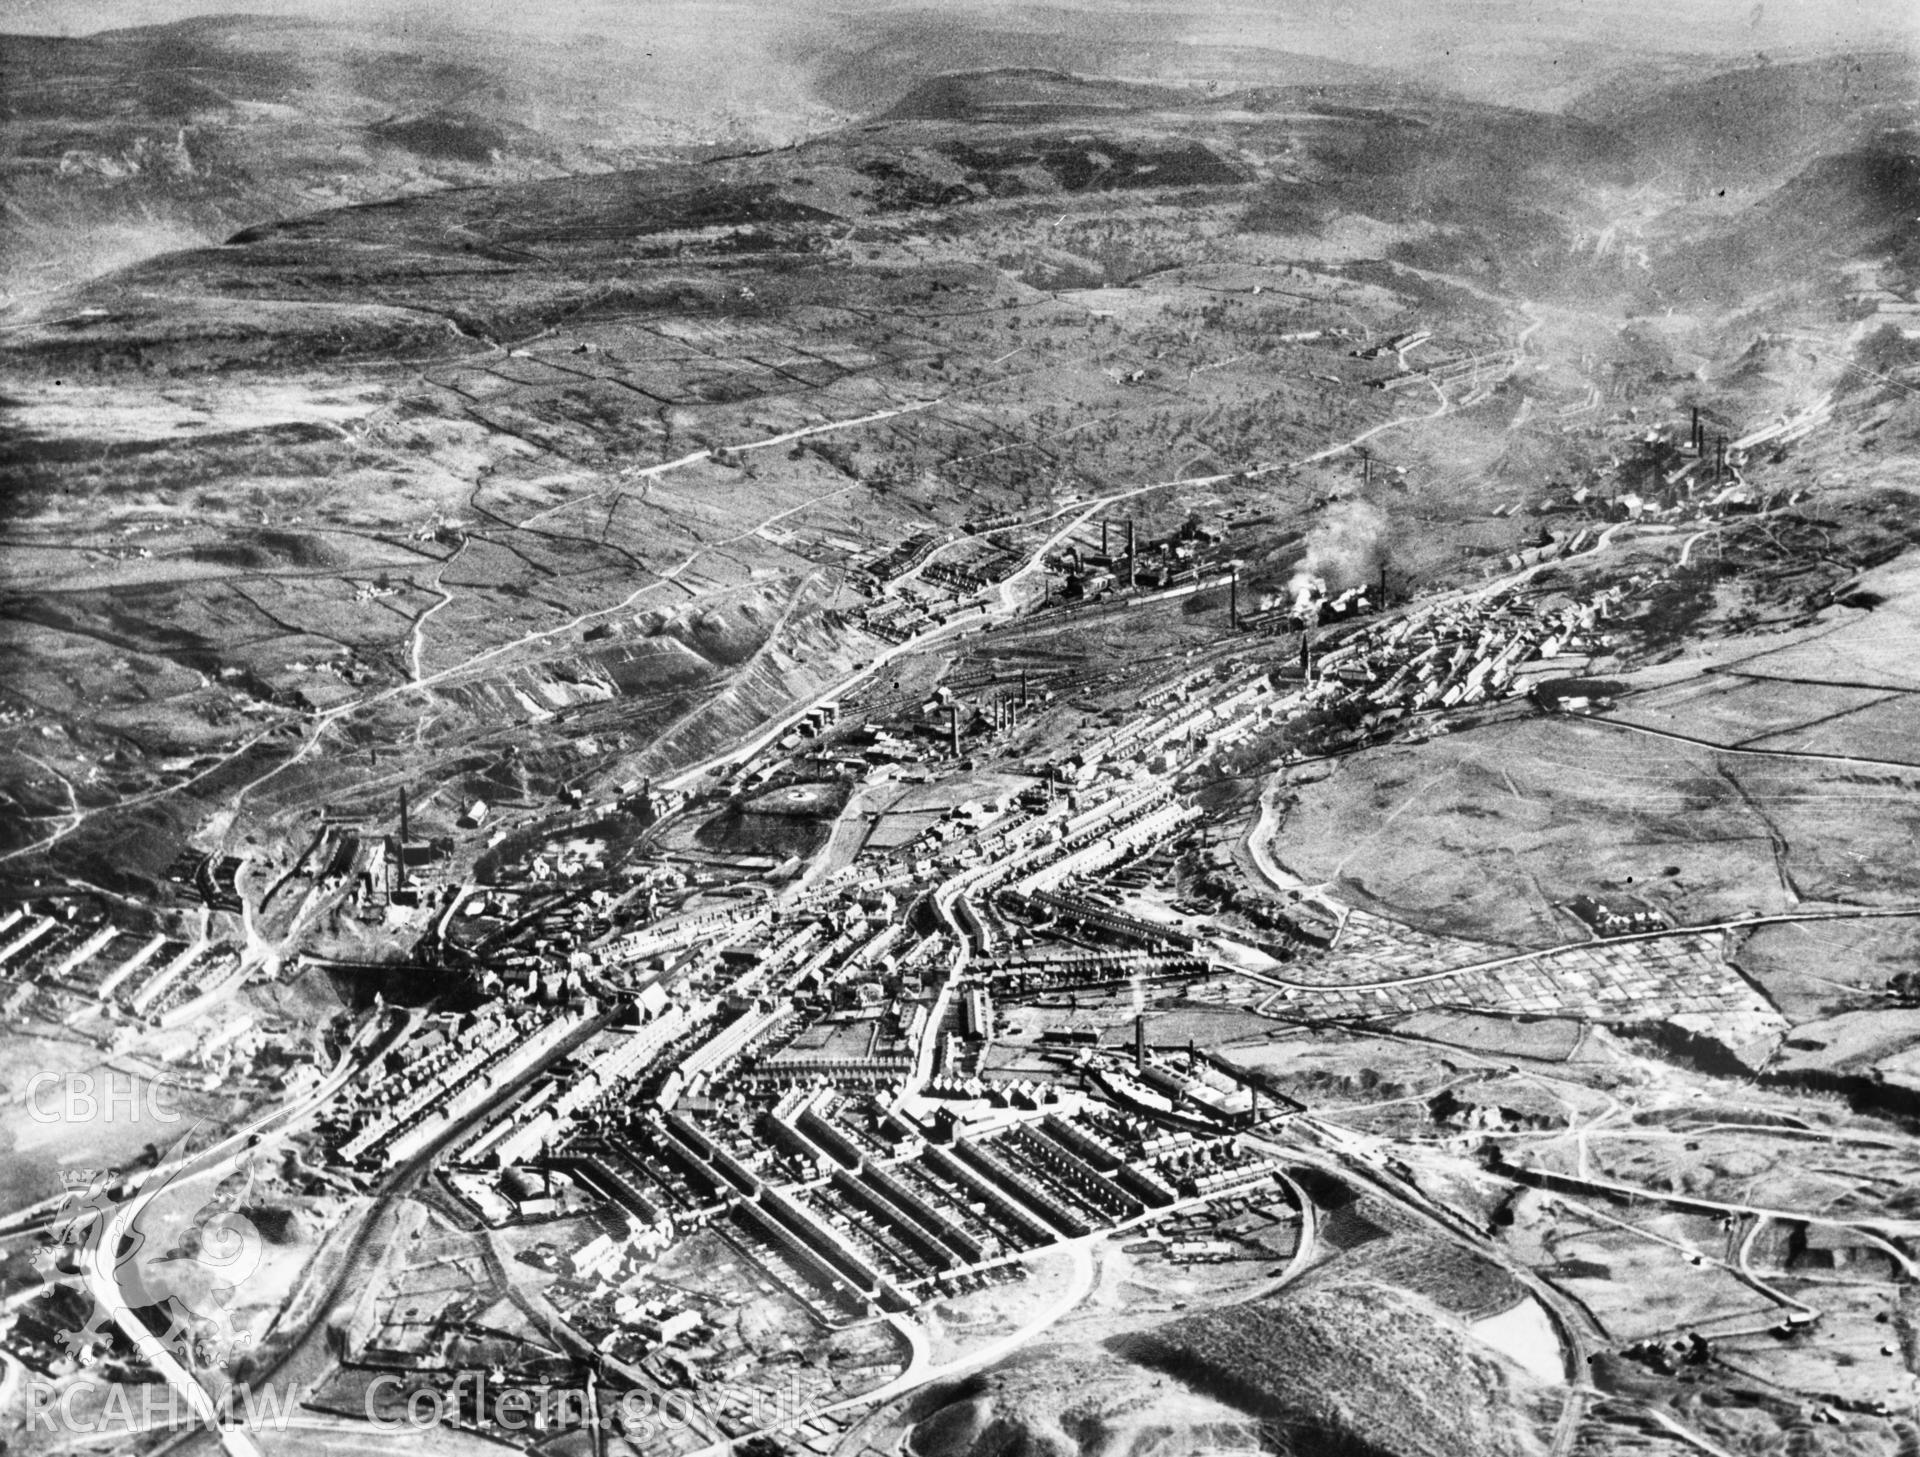 General view of Ebbw Vale showing steelworks, commissioned by R. Thomas & Co.. Oblique aerial photograph.